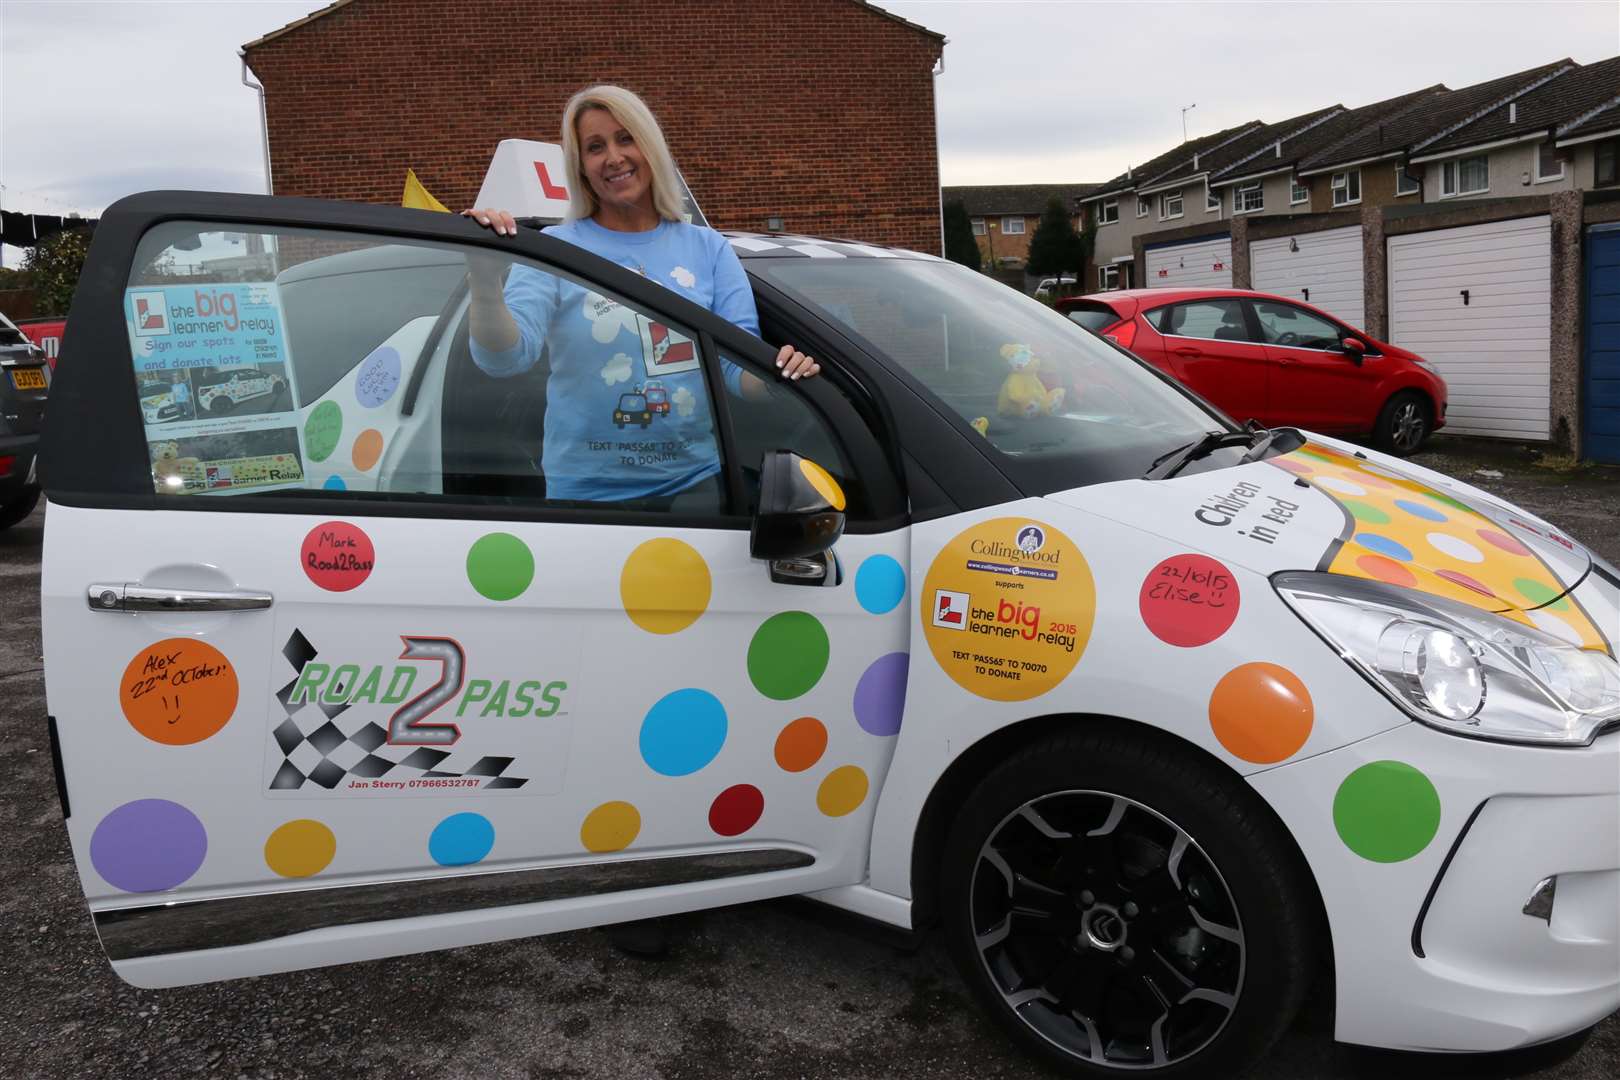 Jan Sterry stands next to her multi-coloured car